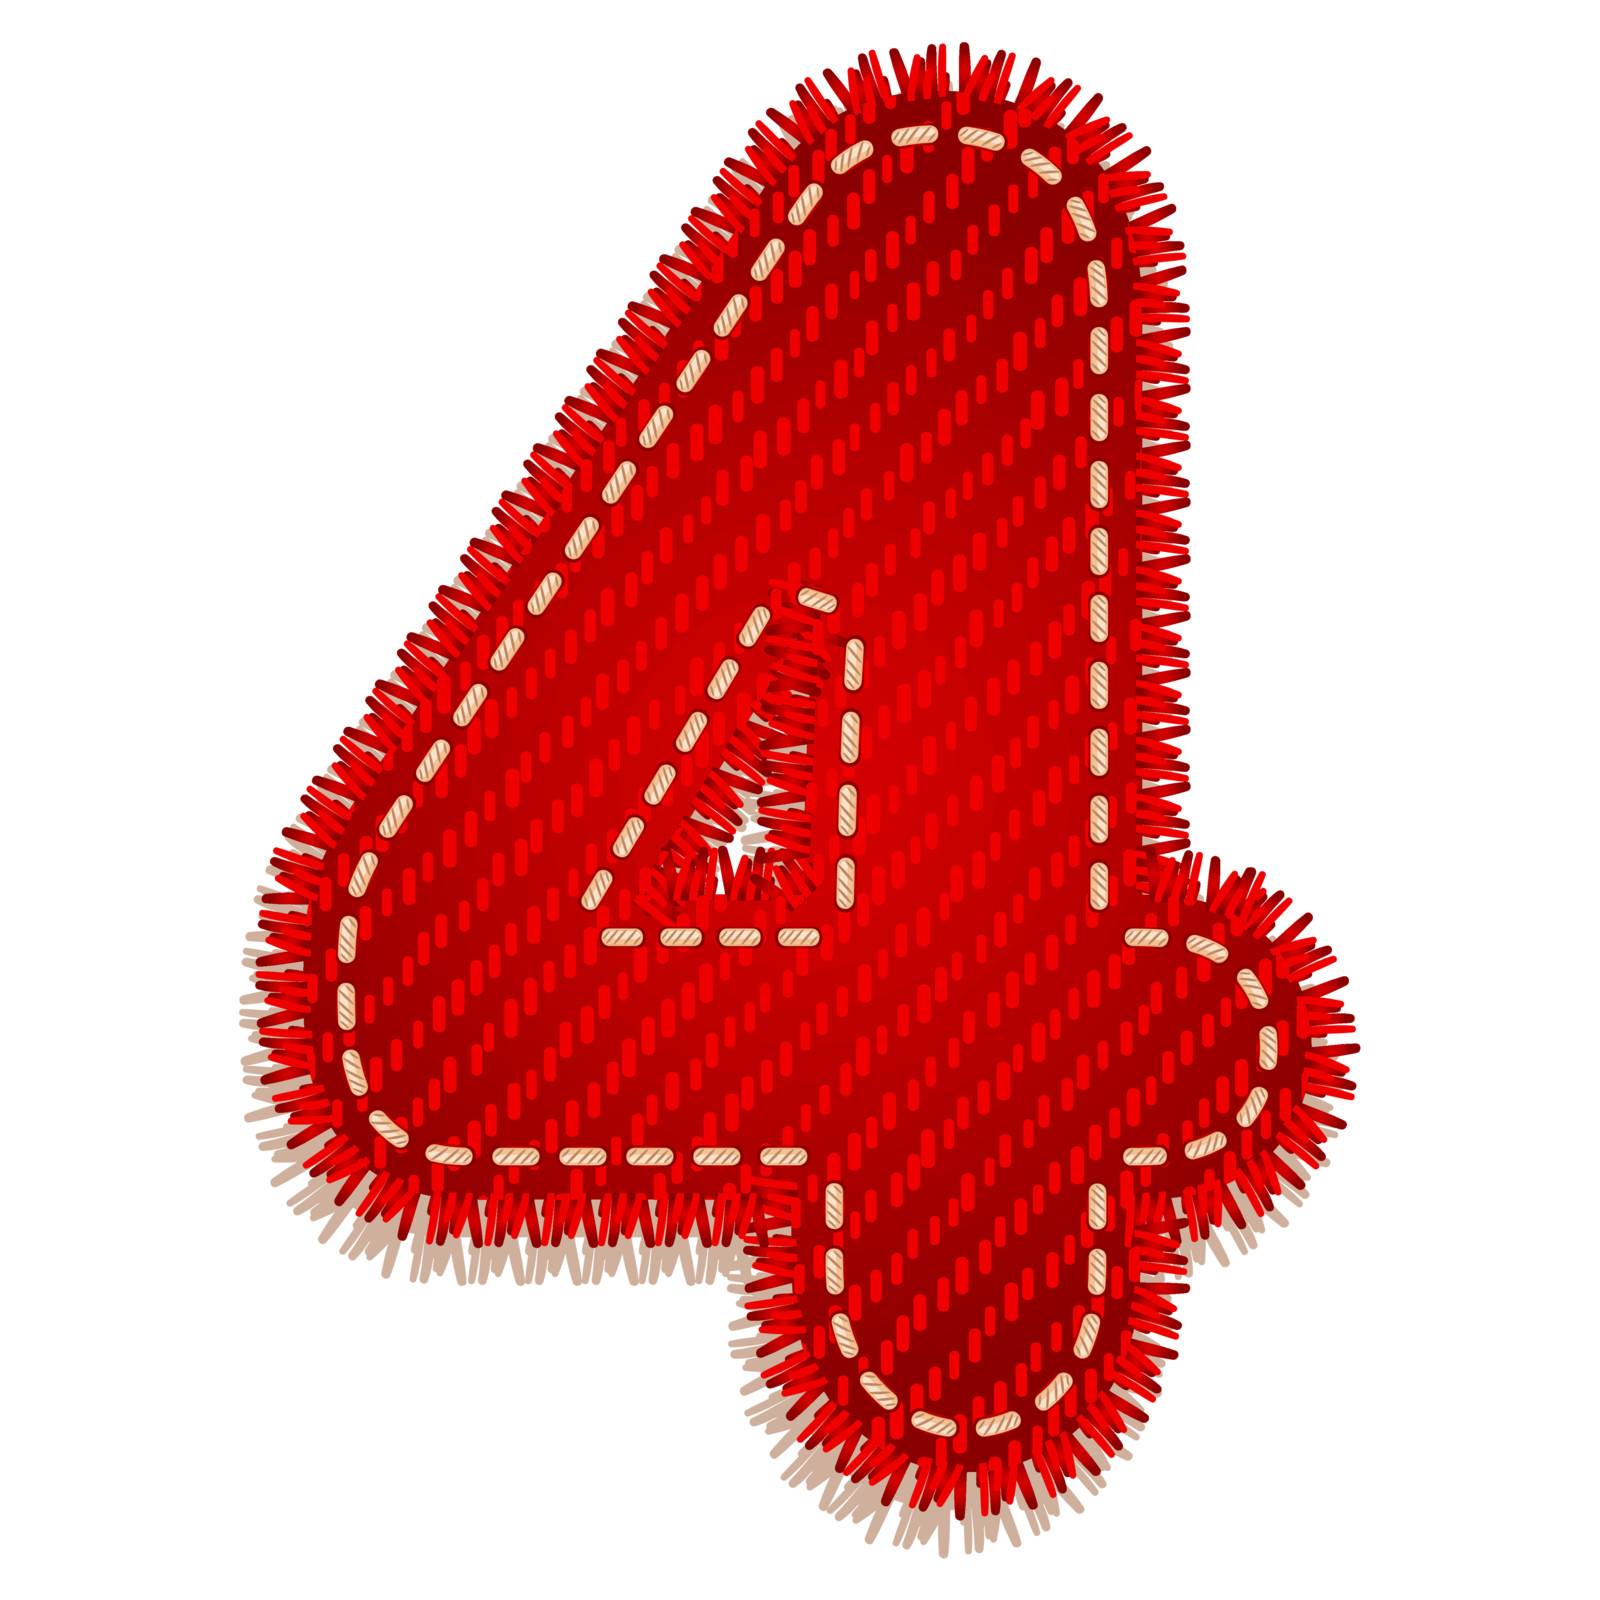 Digit four from red textile alphabet